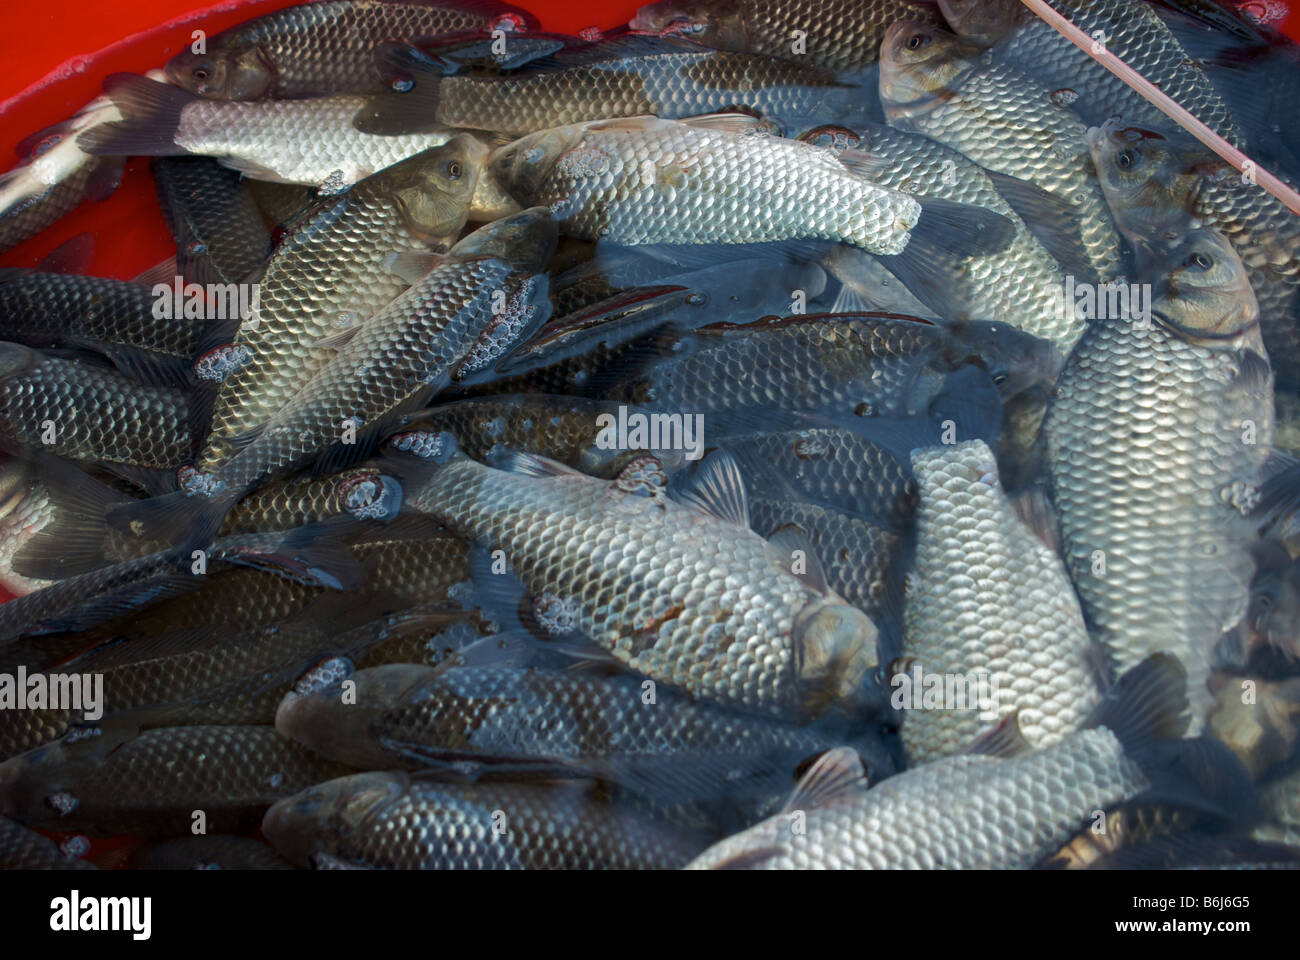 Live Yangtze River fish in plastic tub for sale at street vendor stall in  back alley Stock Photo - Alamy